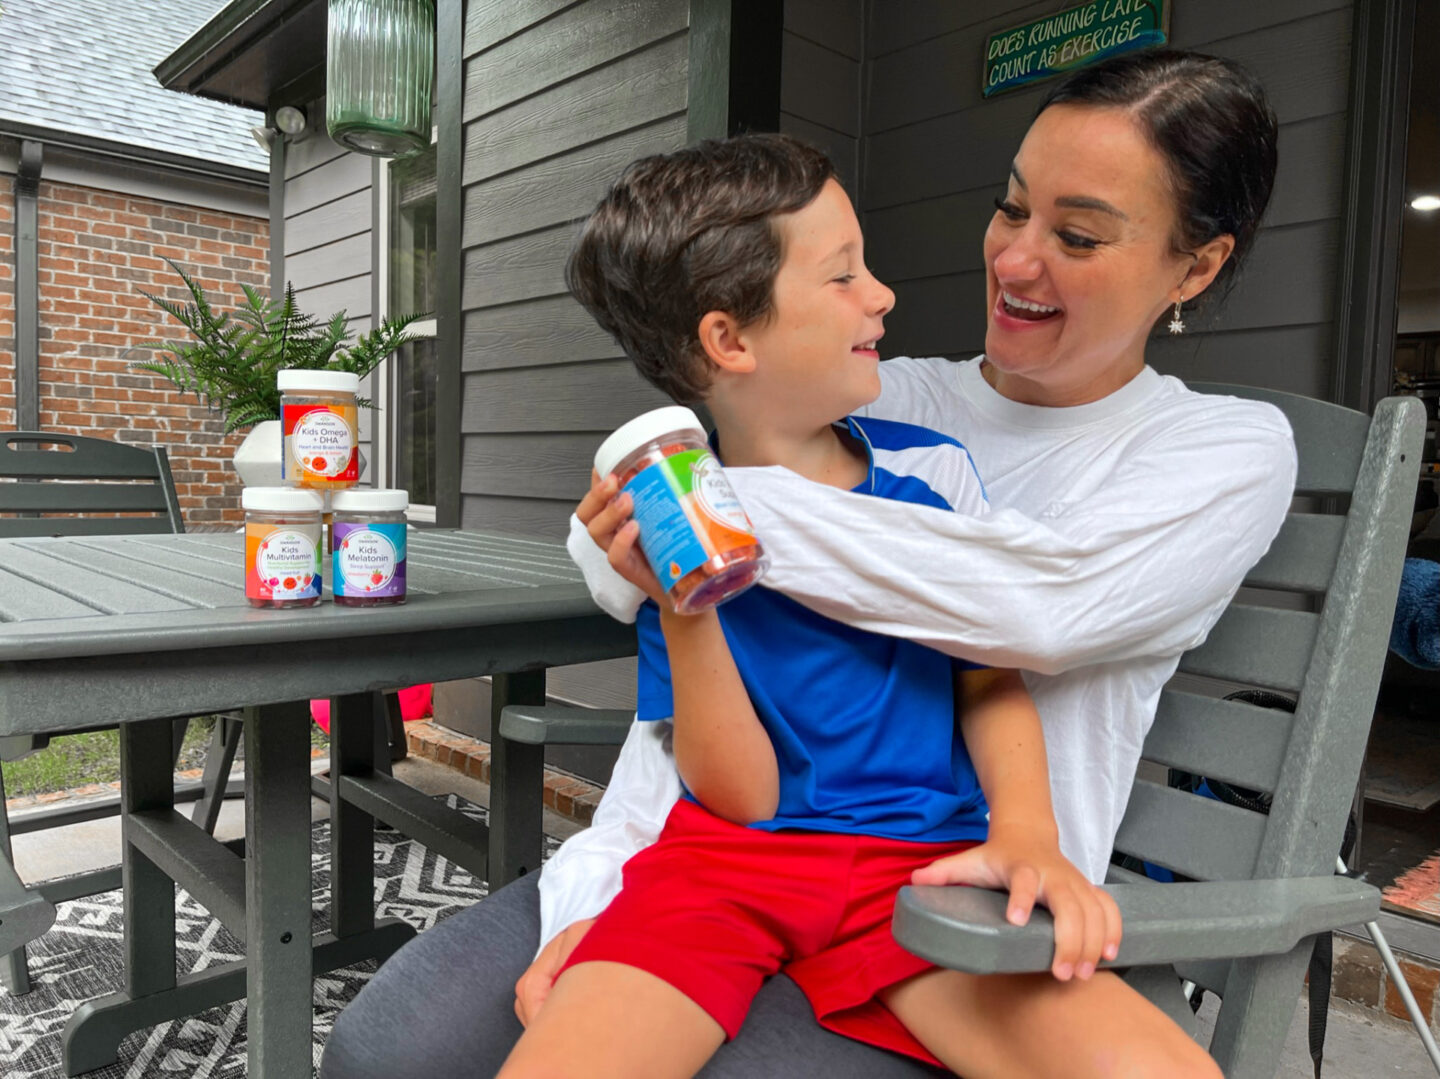 Mom + lifestyle blogger, My Life Well Loved, shares the best water bottles for kids! Click NOW to see what ideas she came up with!